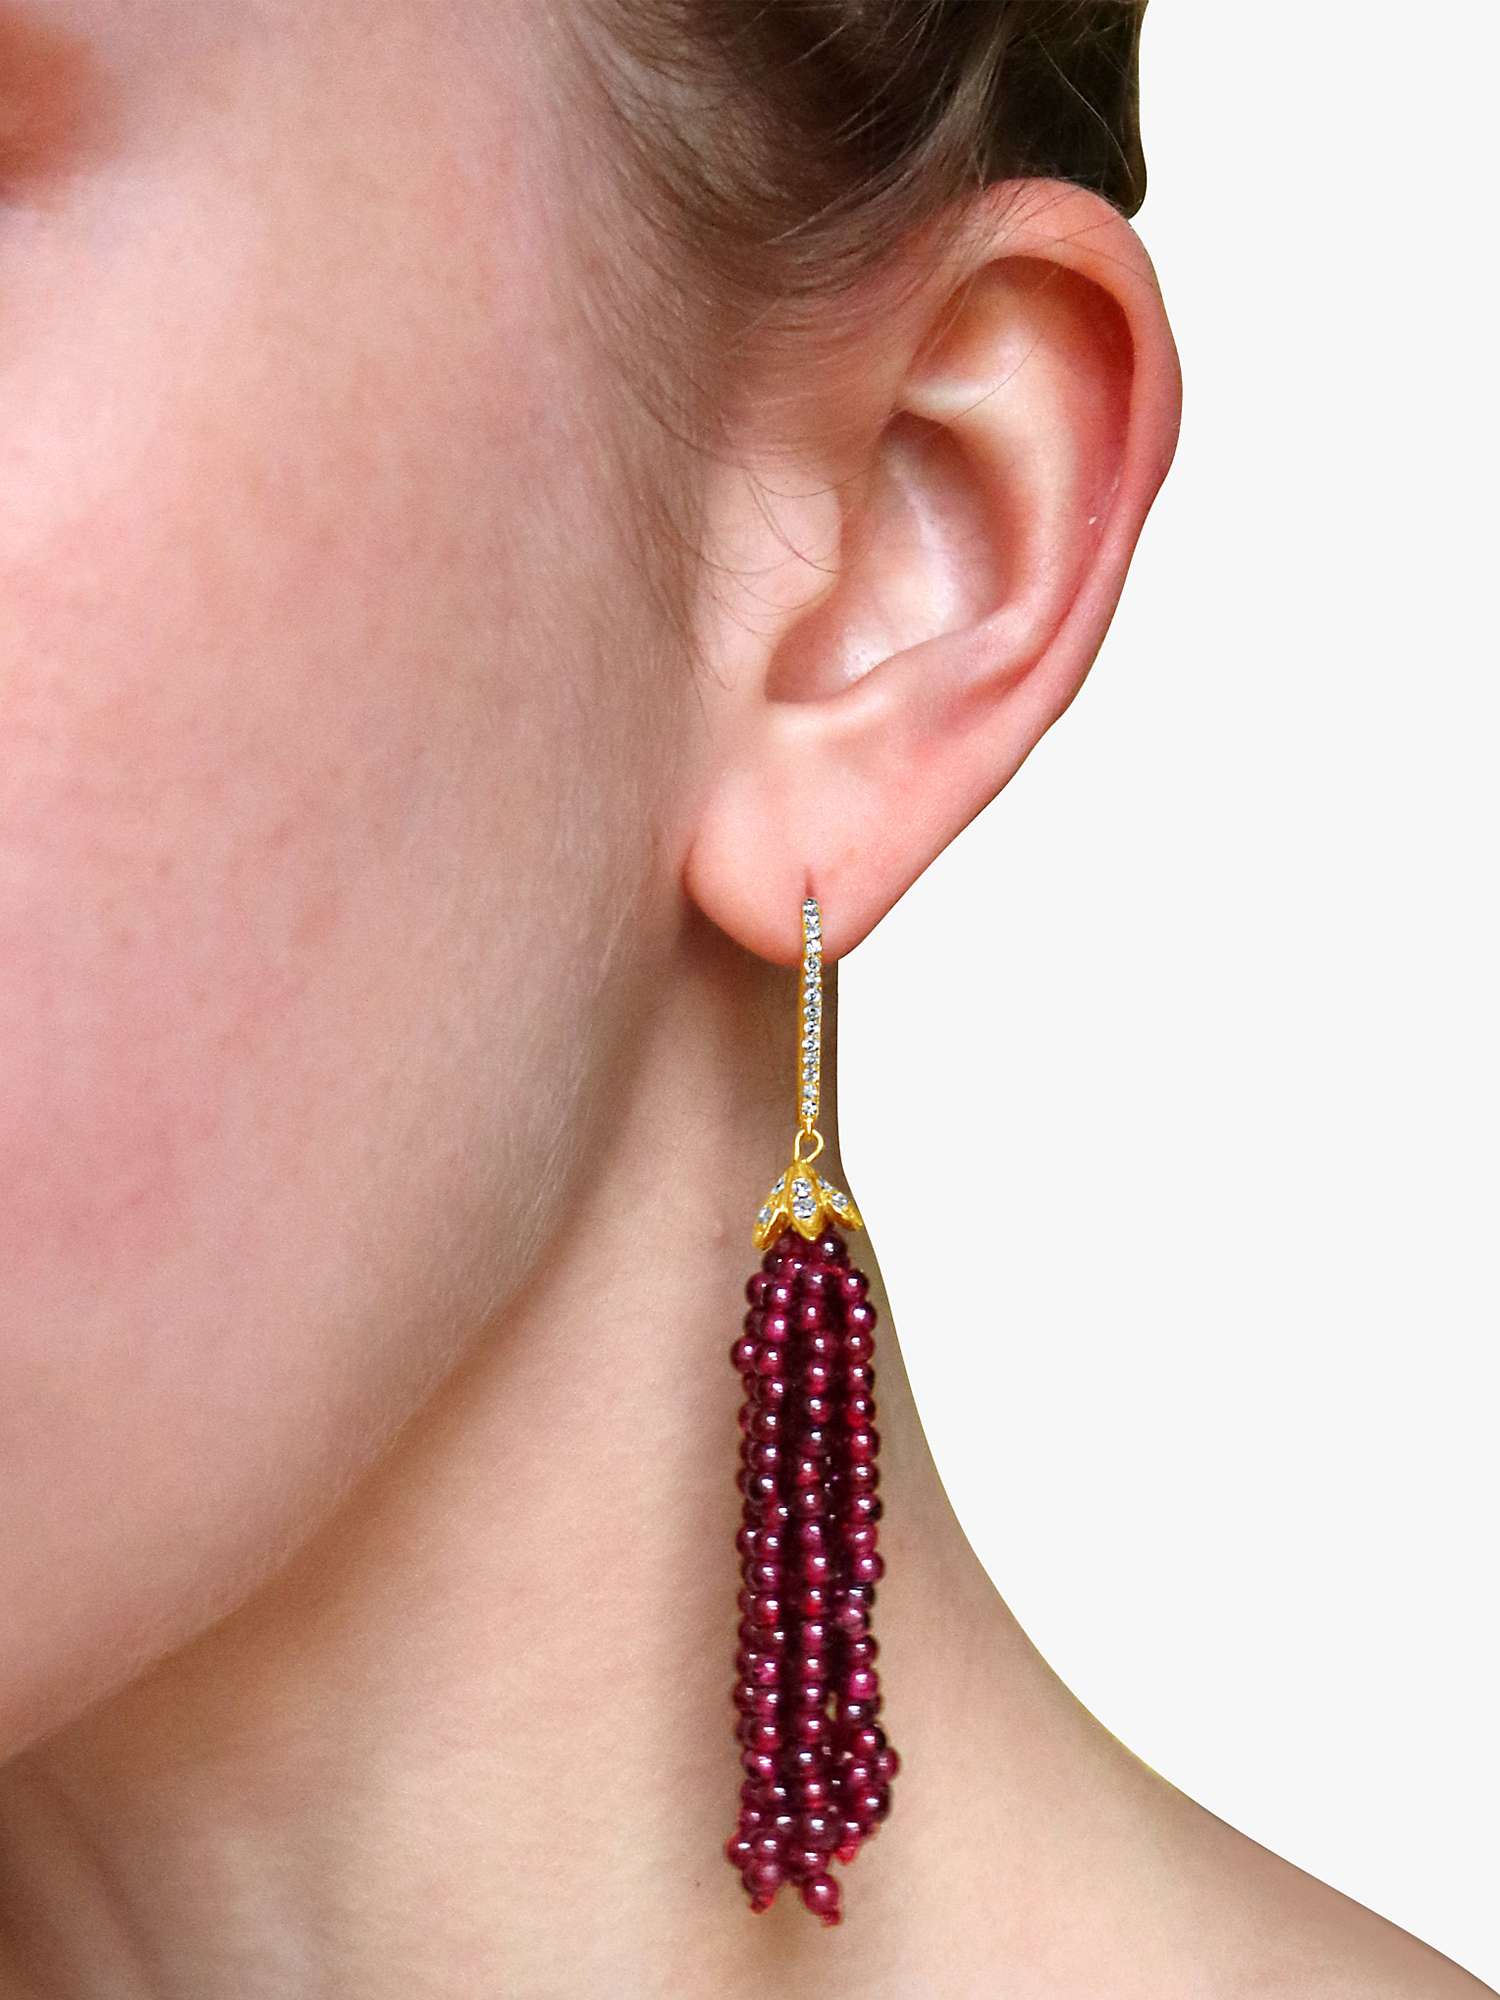 Buy Milton & Humble Jewellery Second Hand 14ct Gold Diamond and Garnet Drop Earrings Online at johnlewis.com